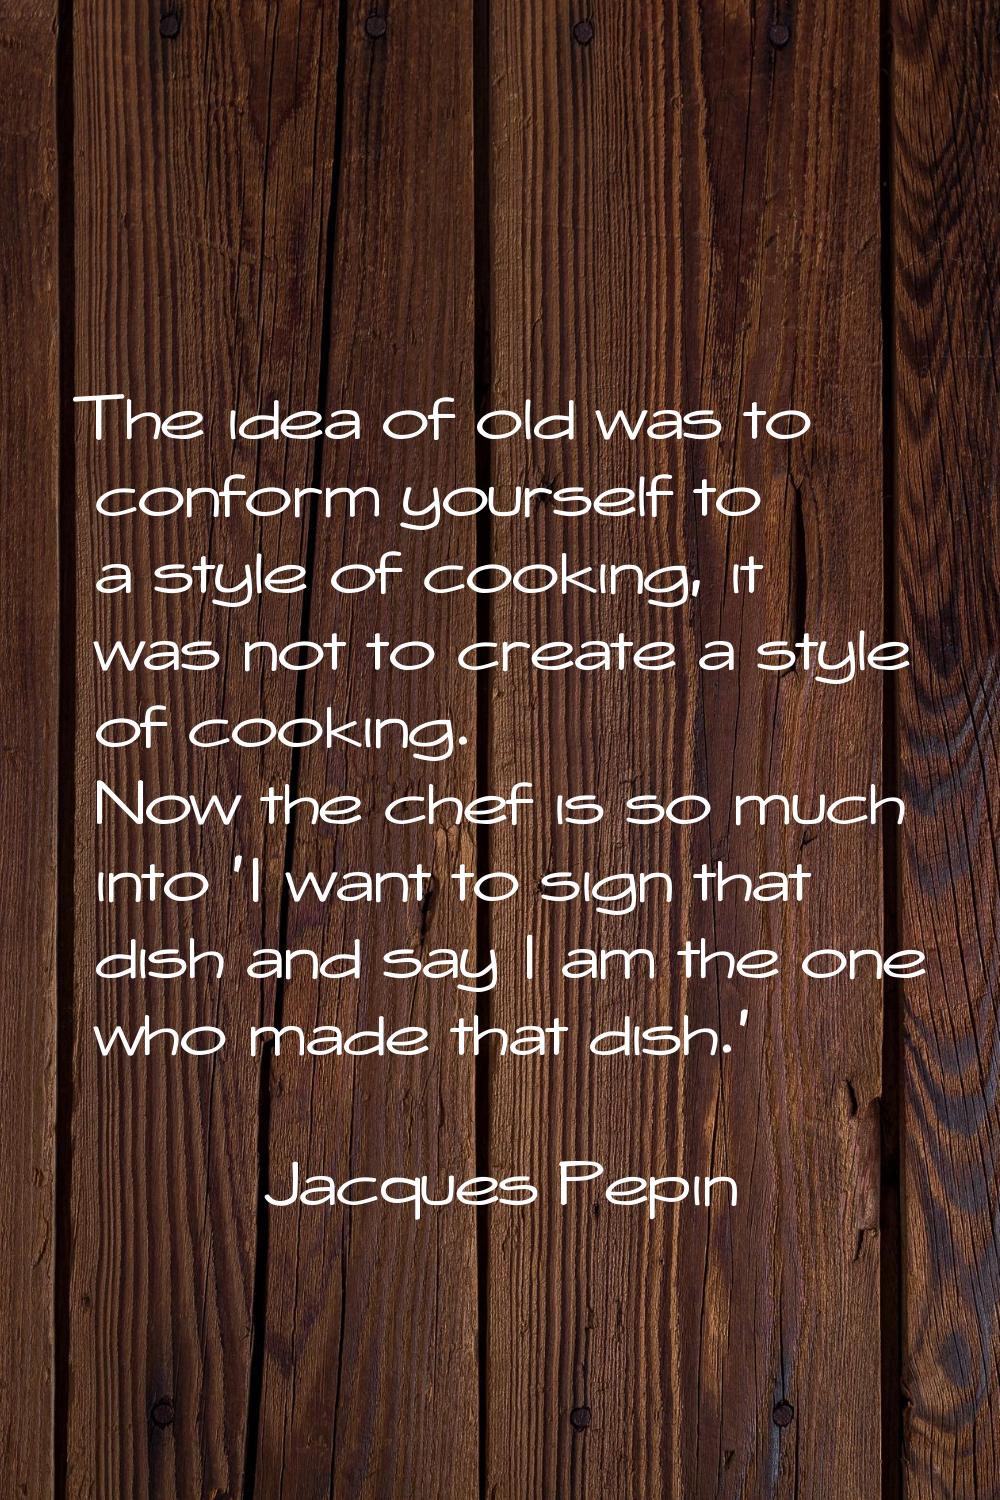 The idea of old was to conform yourself to a style of cooking, it was not to create a style of cook